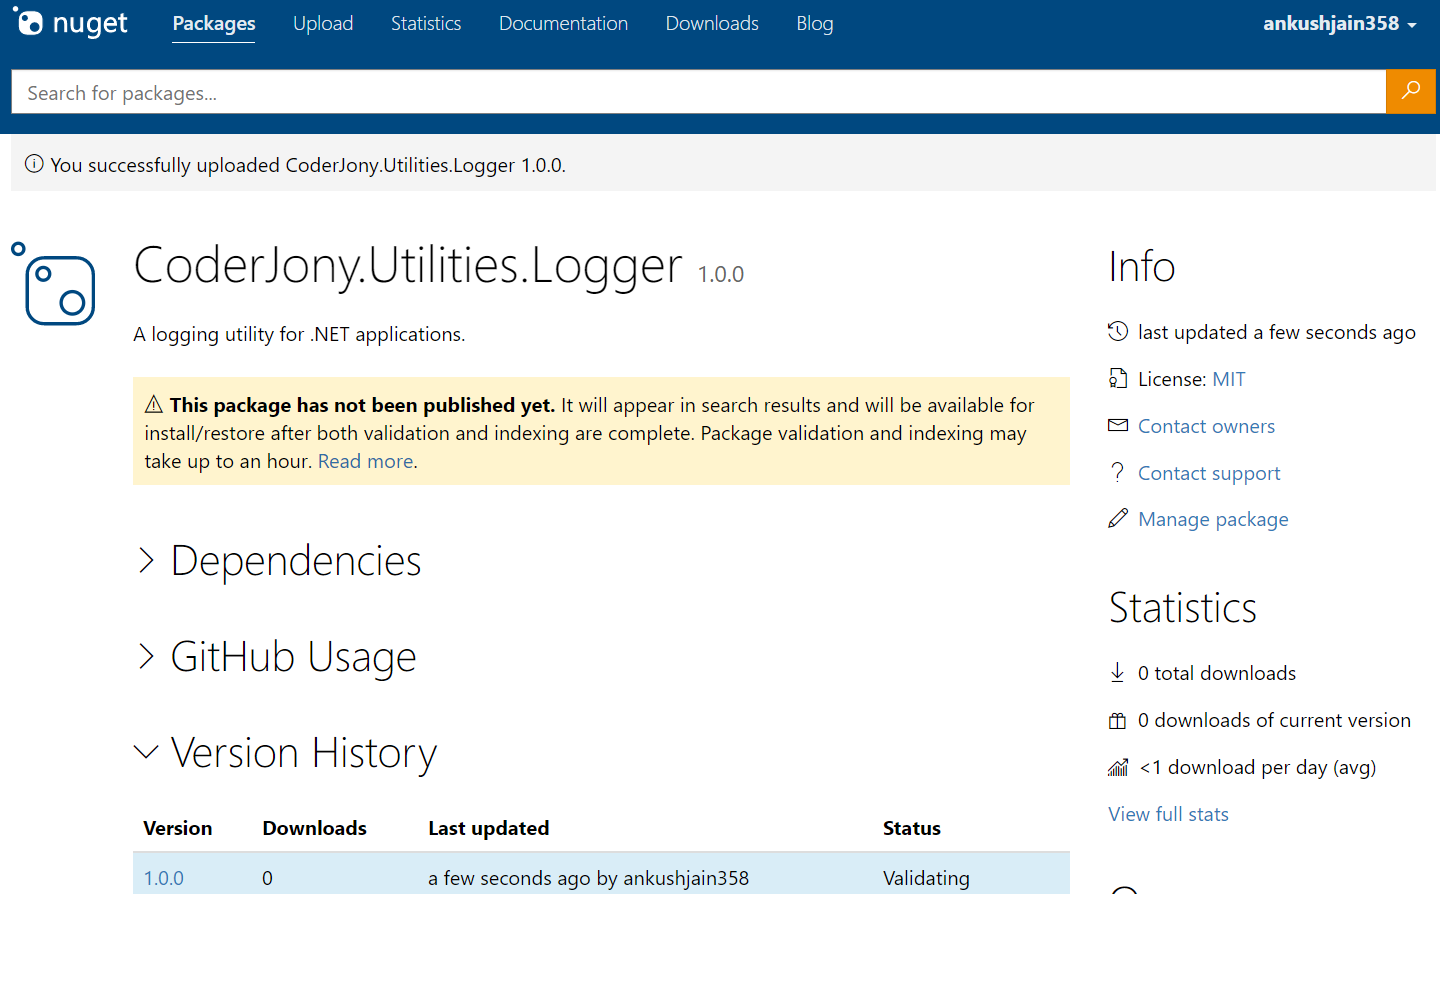 Creating NuGet package using Visual Studio 2019 and deploying it to Nuget.org